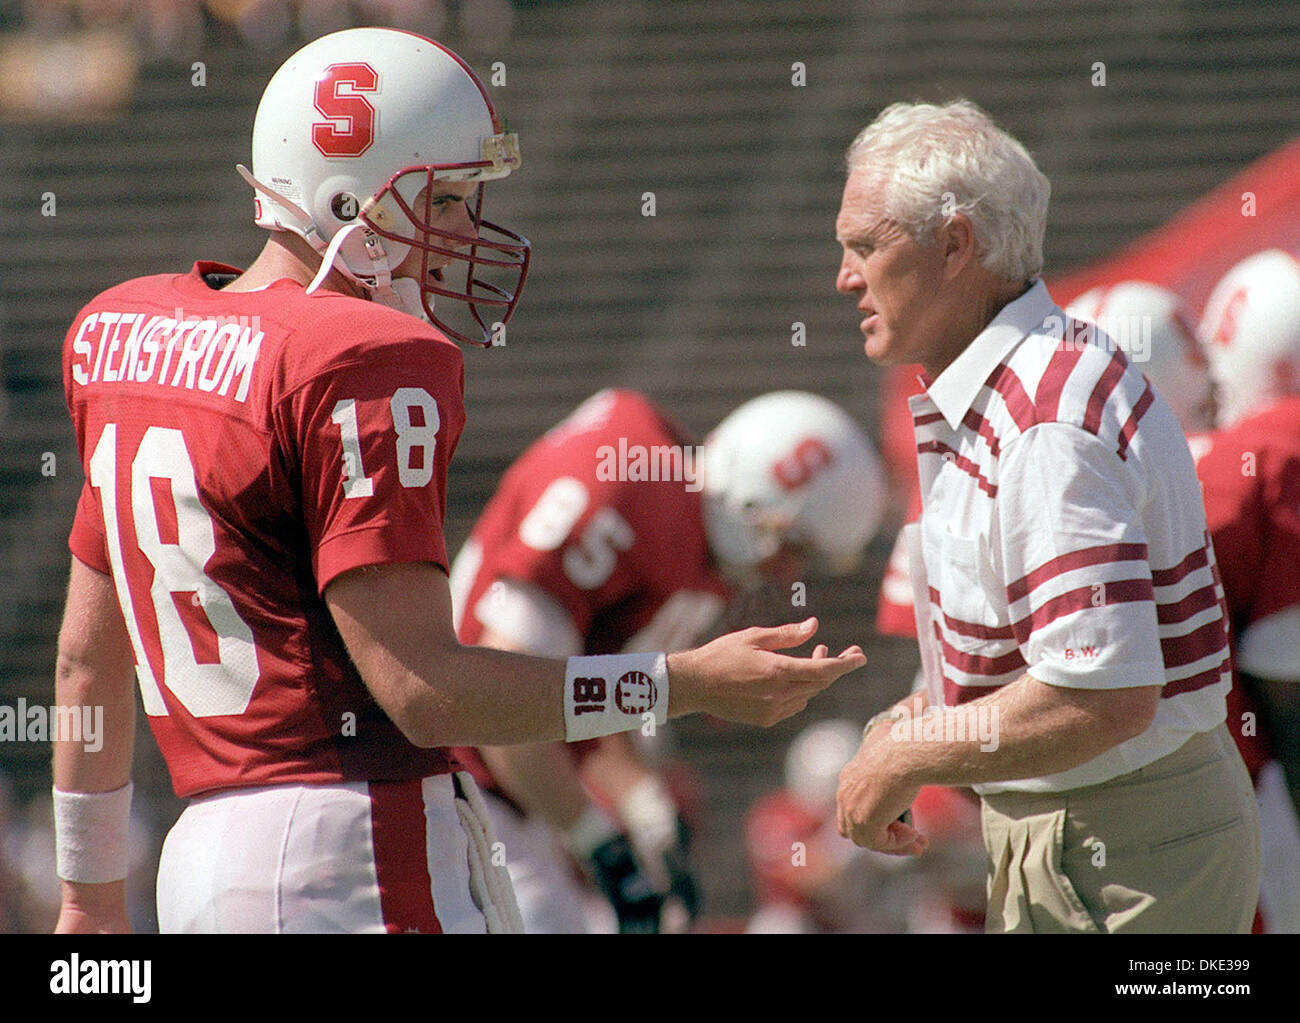 Stanford, California, USA - BILL WALSH, the inventor of the West Coast Offense, was one of the greatest football coaches of all time. Walsh, guided the San Francisco 49ers to three championships and six NFC West division titles in his 10 years as head coach, has died at the age of 75, following a long battle with leukemia. PICTURED: Stanford head coach Bill Walsh talking with quart Stock Photo